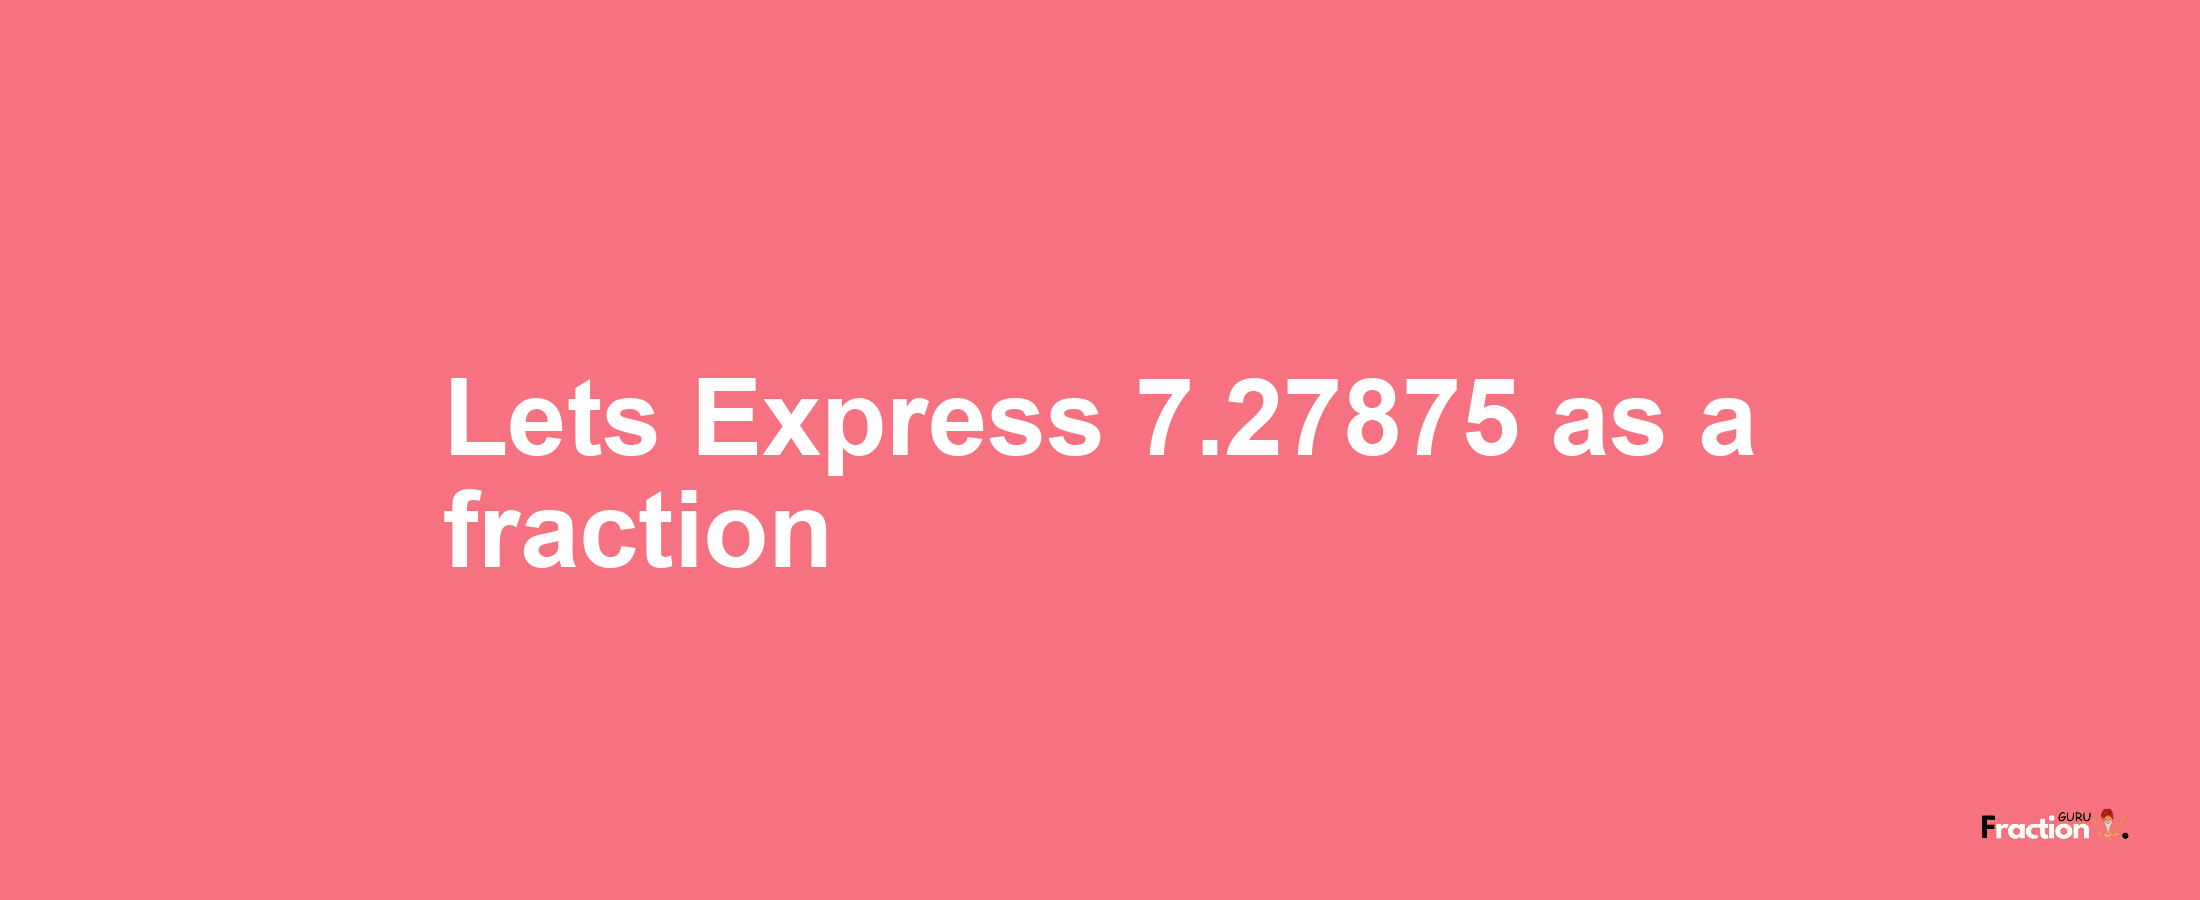 Lets Express 7.27875 as afraction